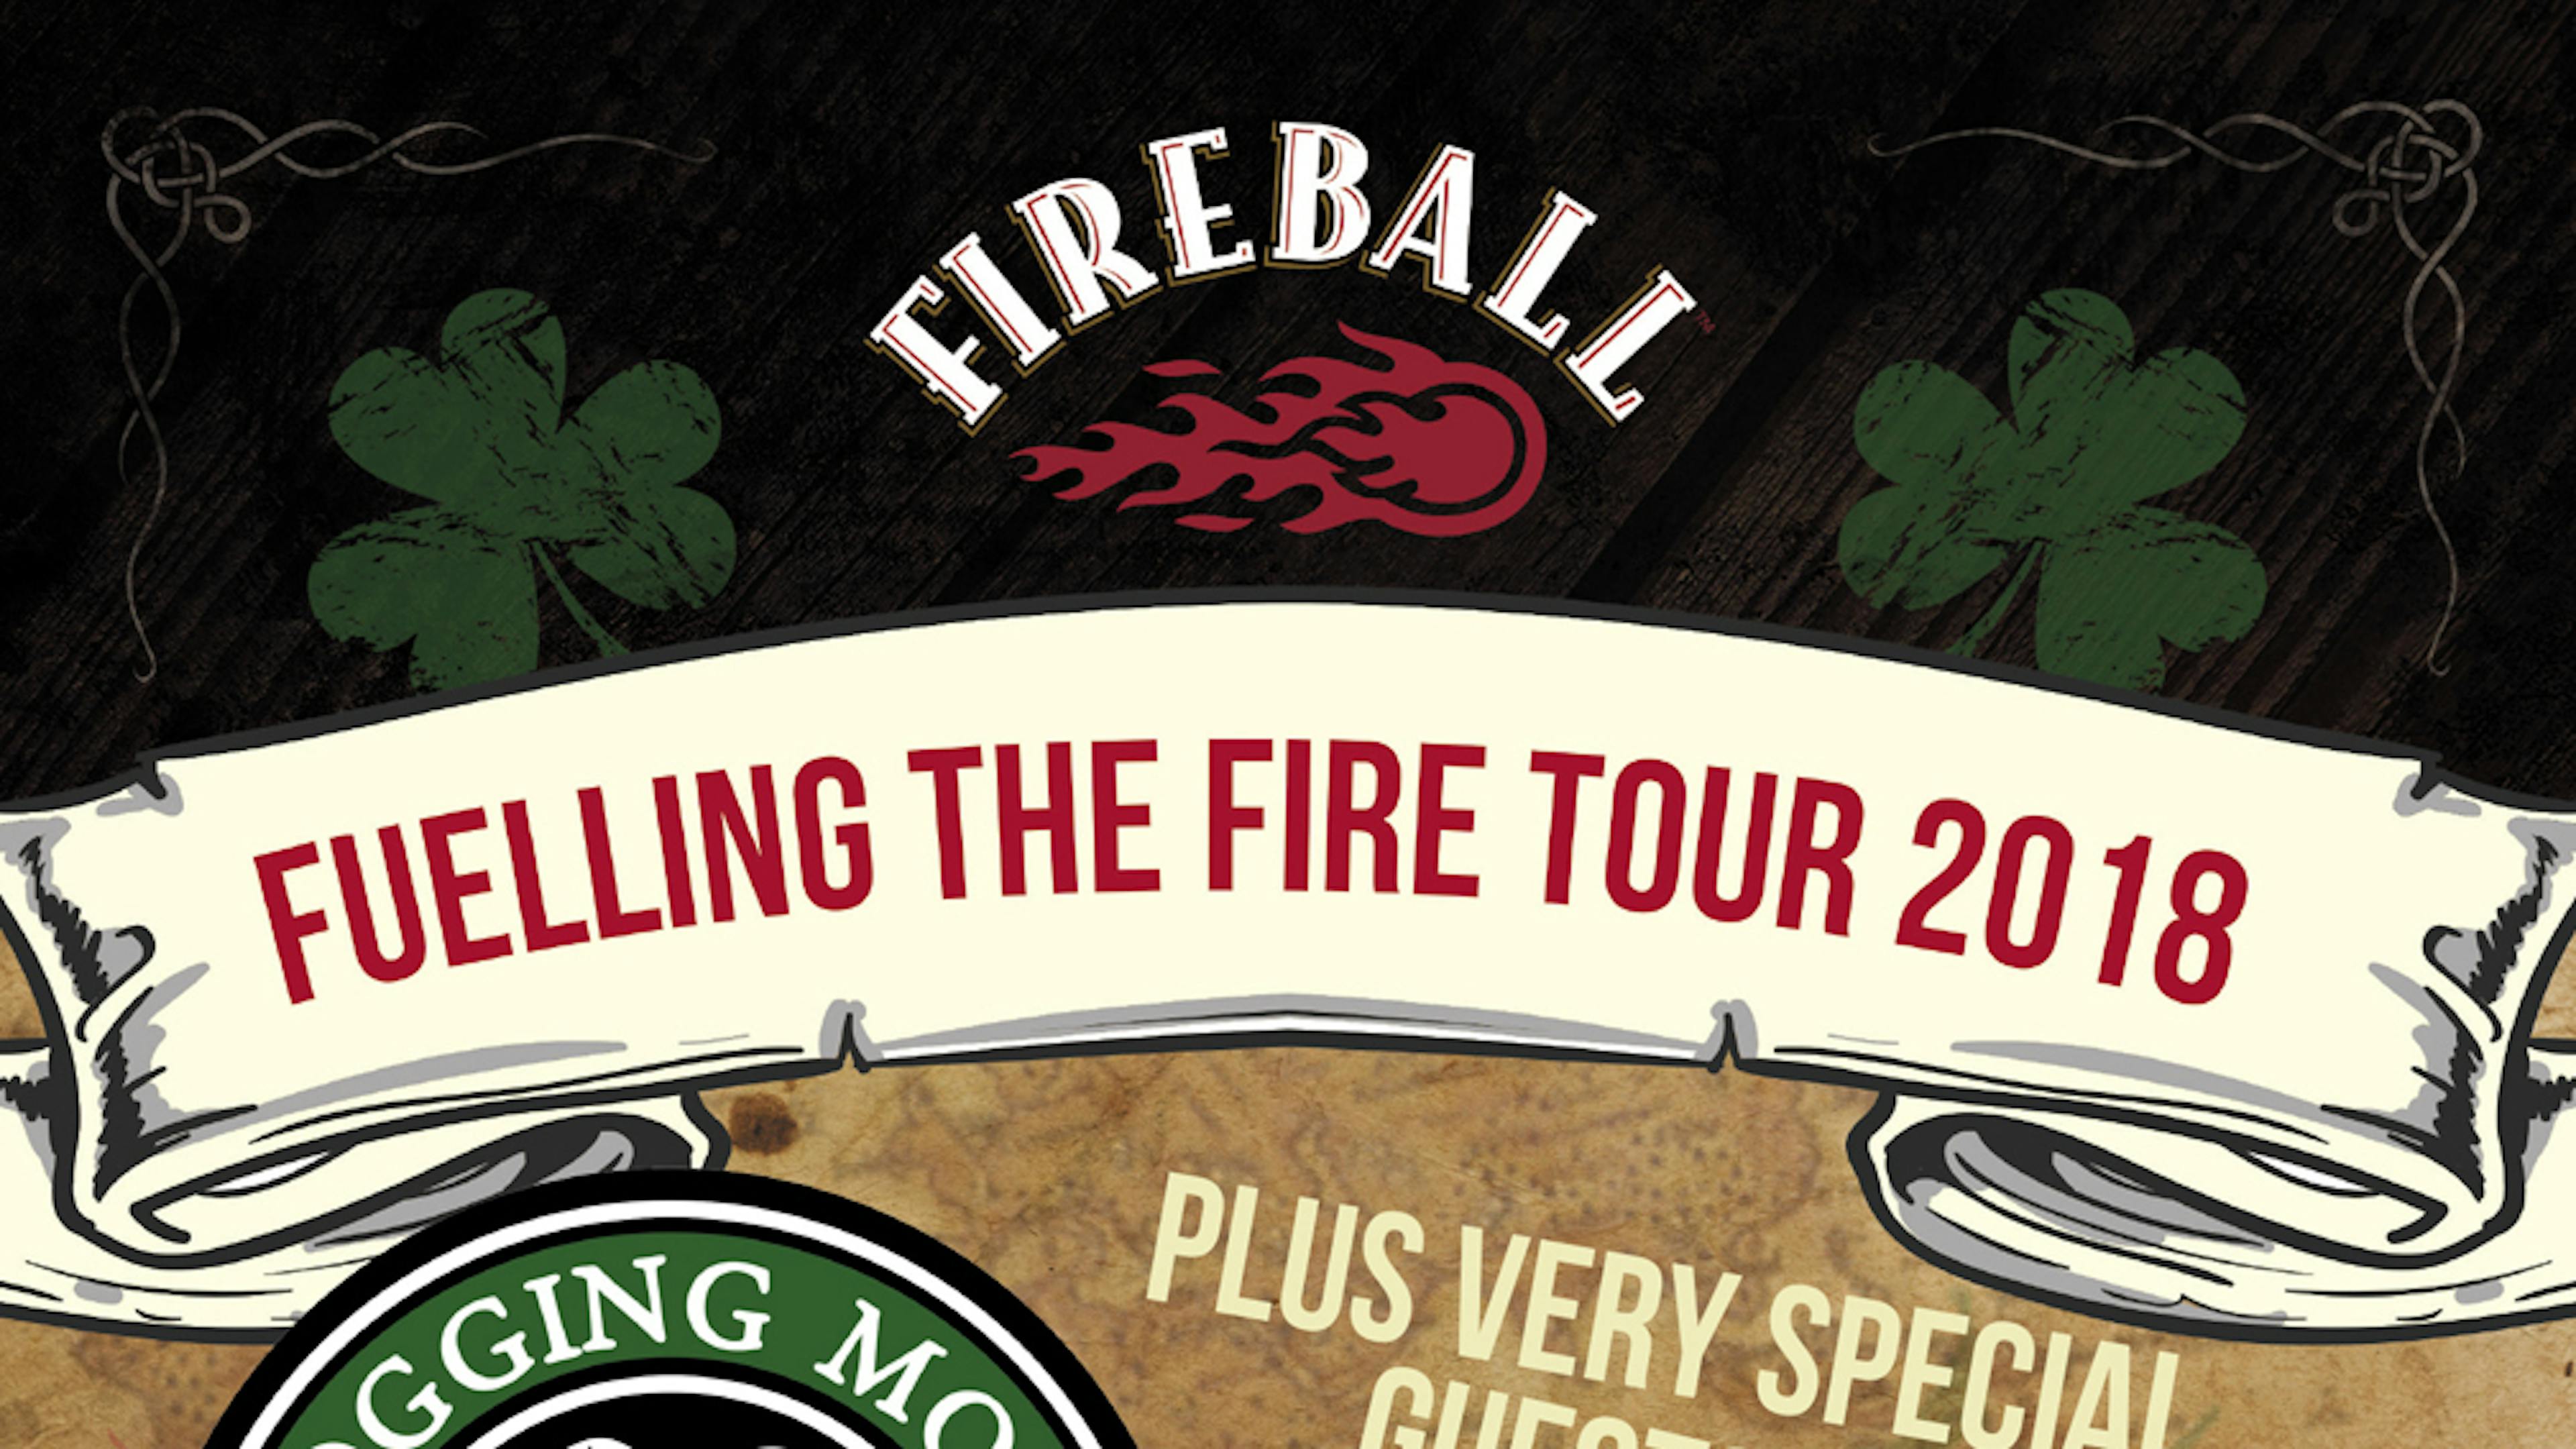 Fireball – Fuelling The Fire Tour 2018 Reveals First Names